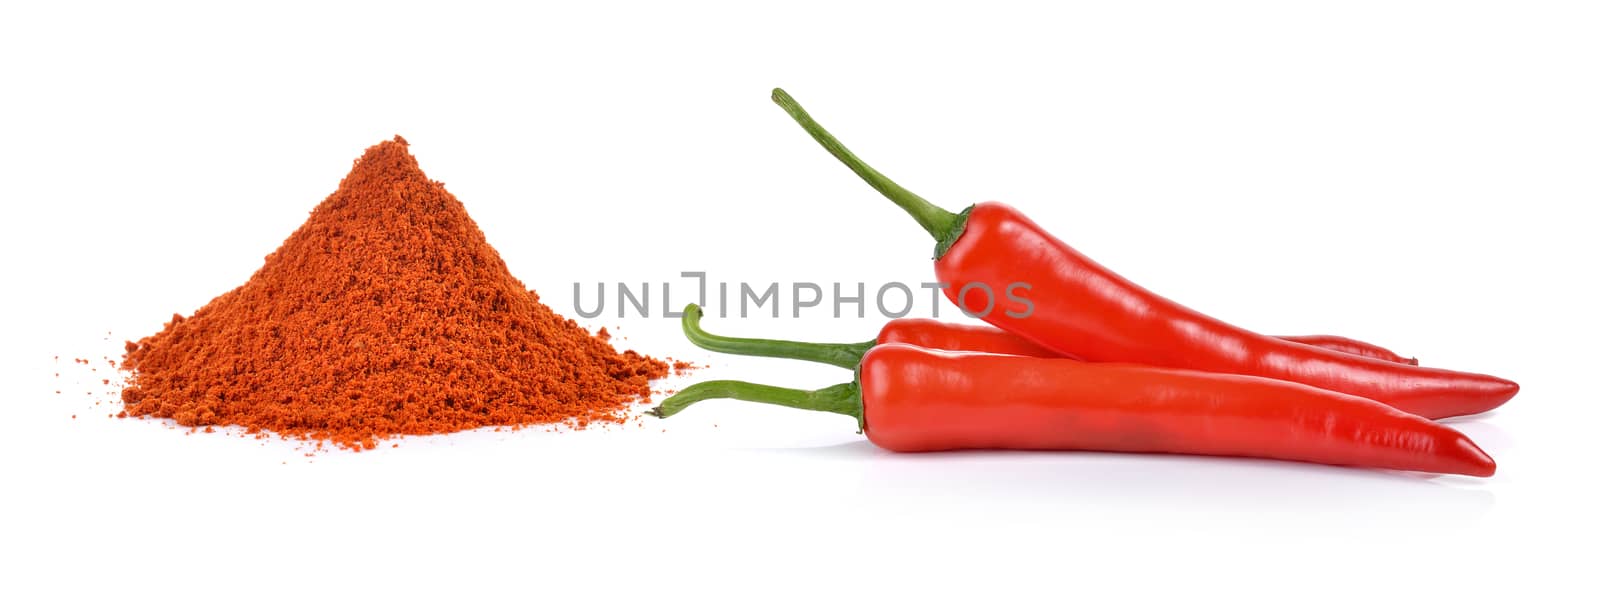 Red chili pepper isolated on a white background by sommai